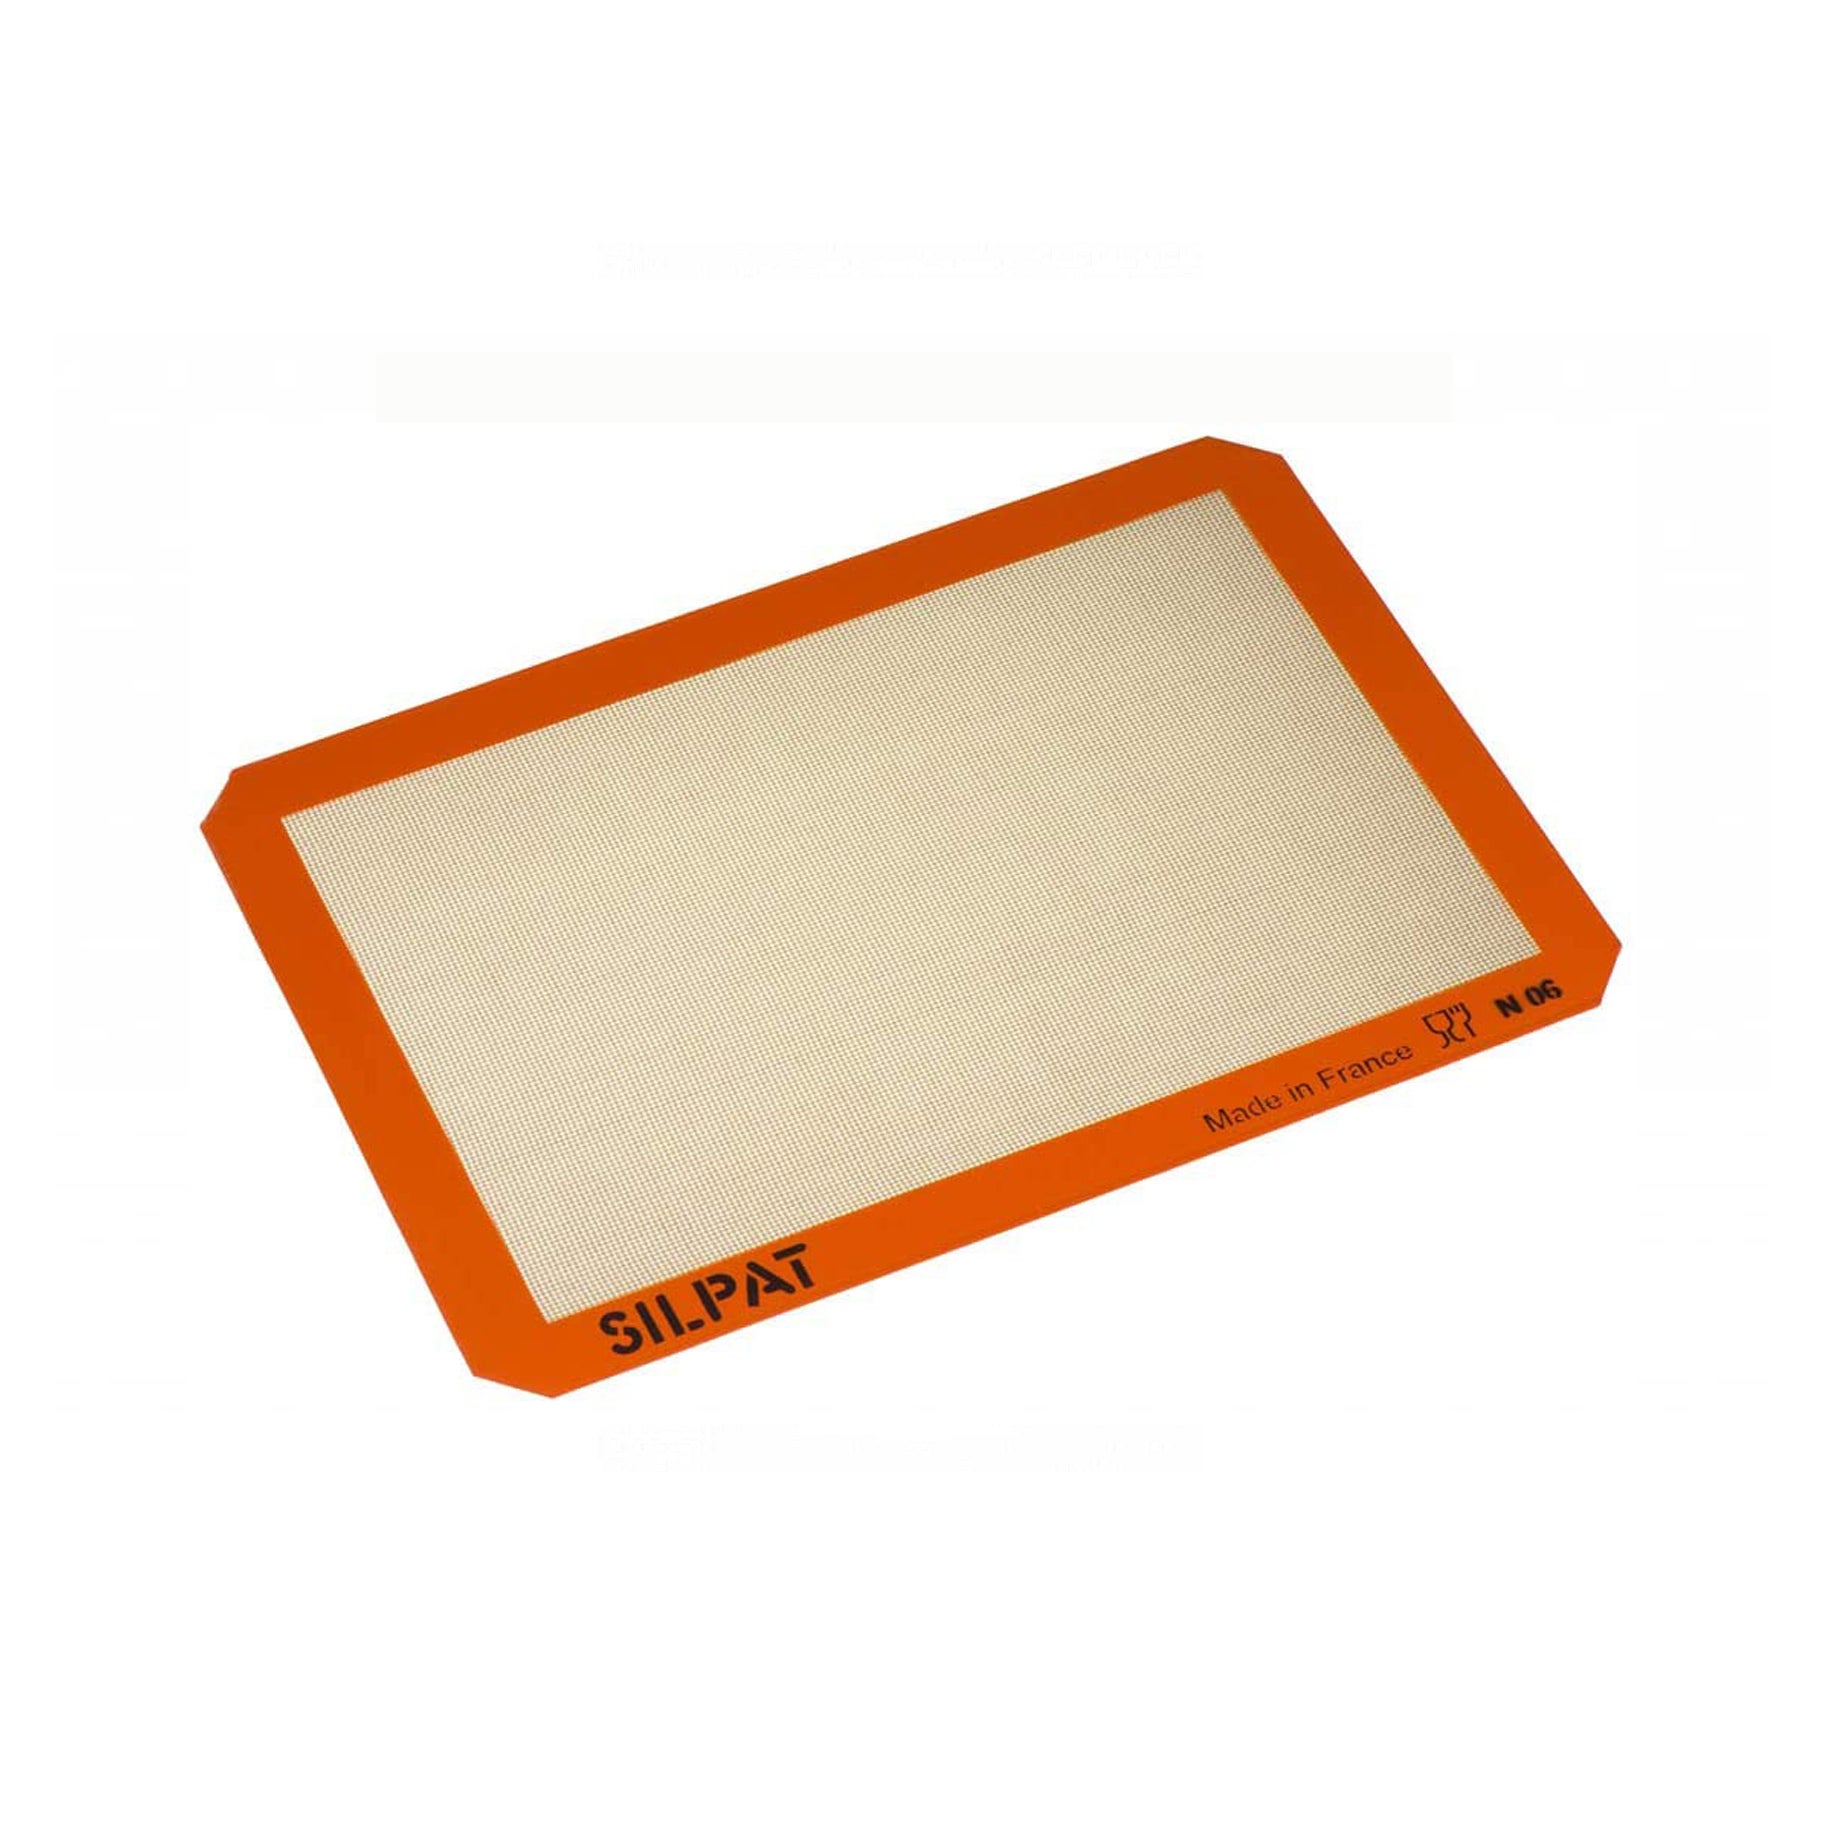 The Best Overall: Silpat Non-Stick Silicone Baking Mat